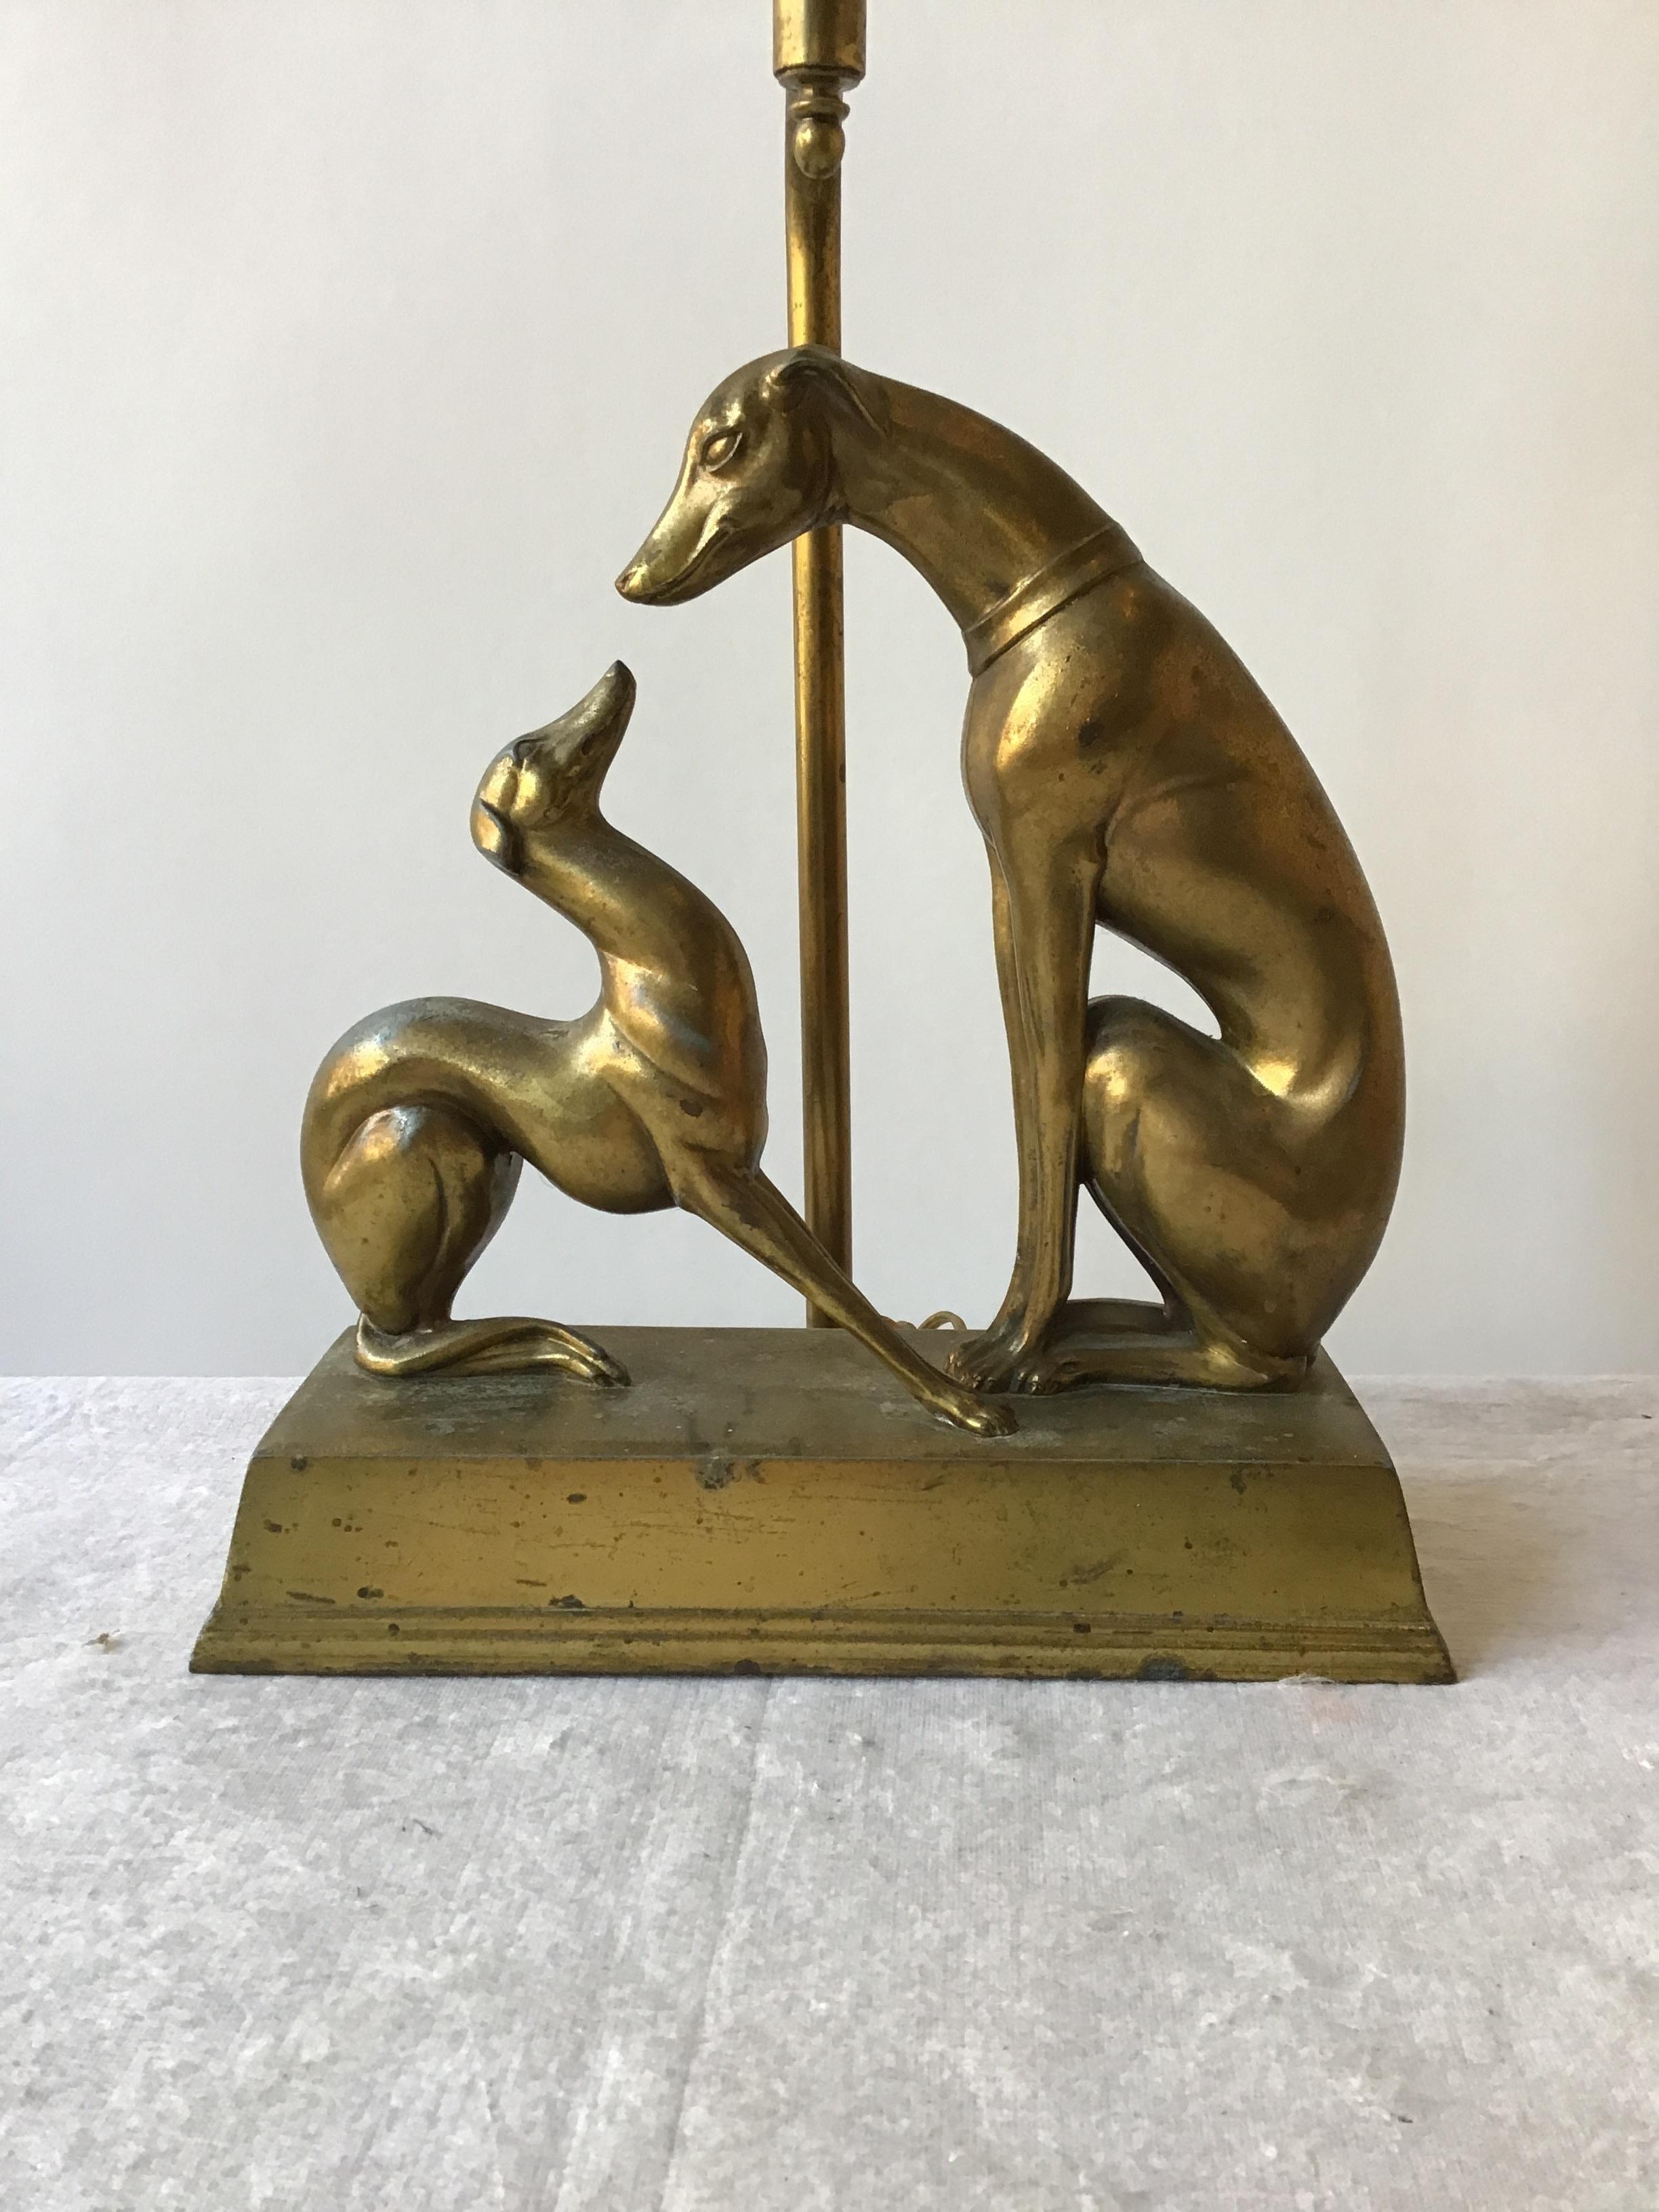 1930s deco Greyhound lamp. Brass-plated over metal. Areas of wear on lamp.